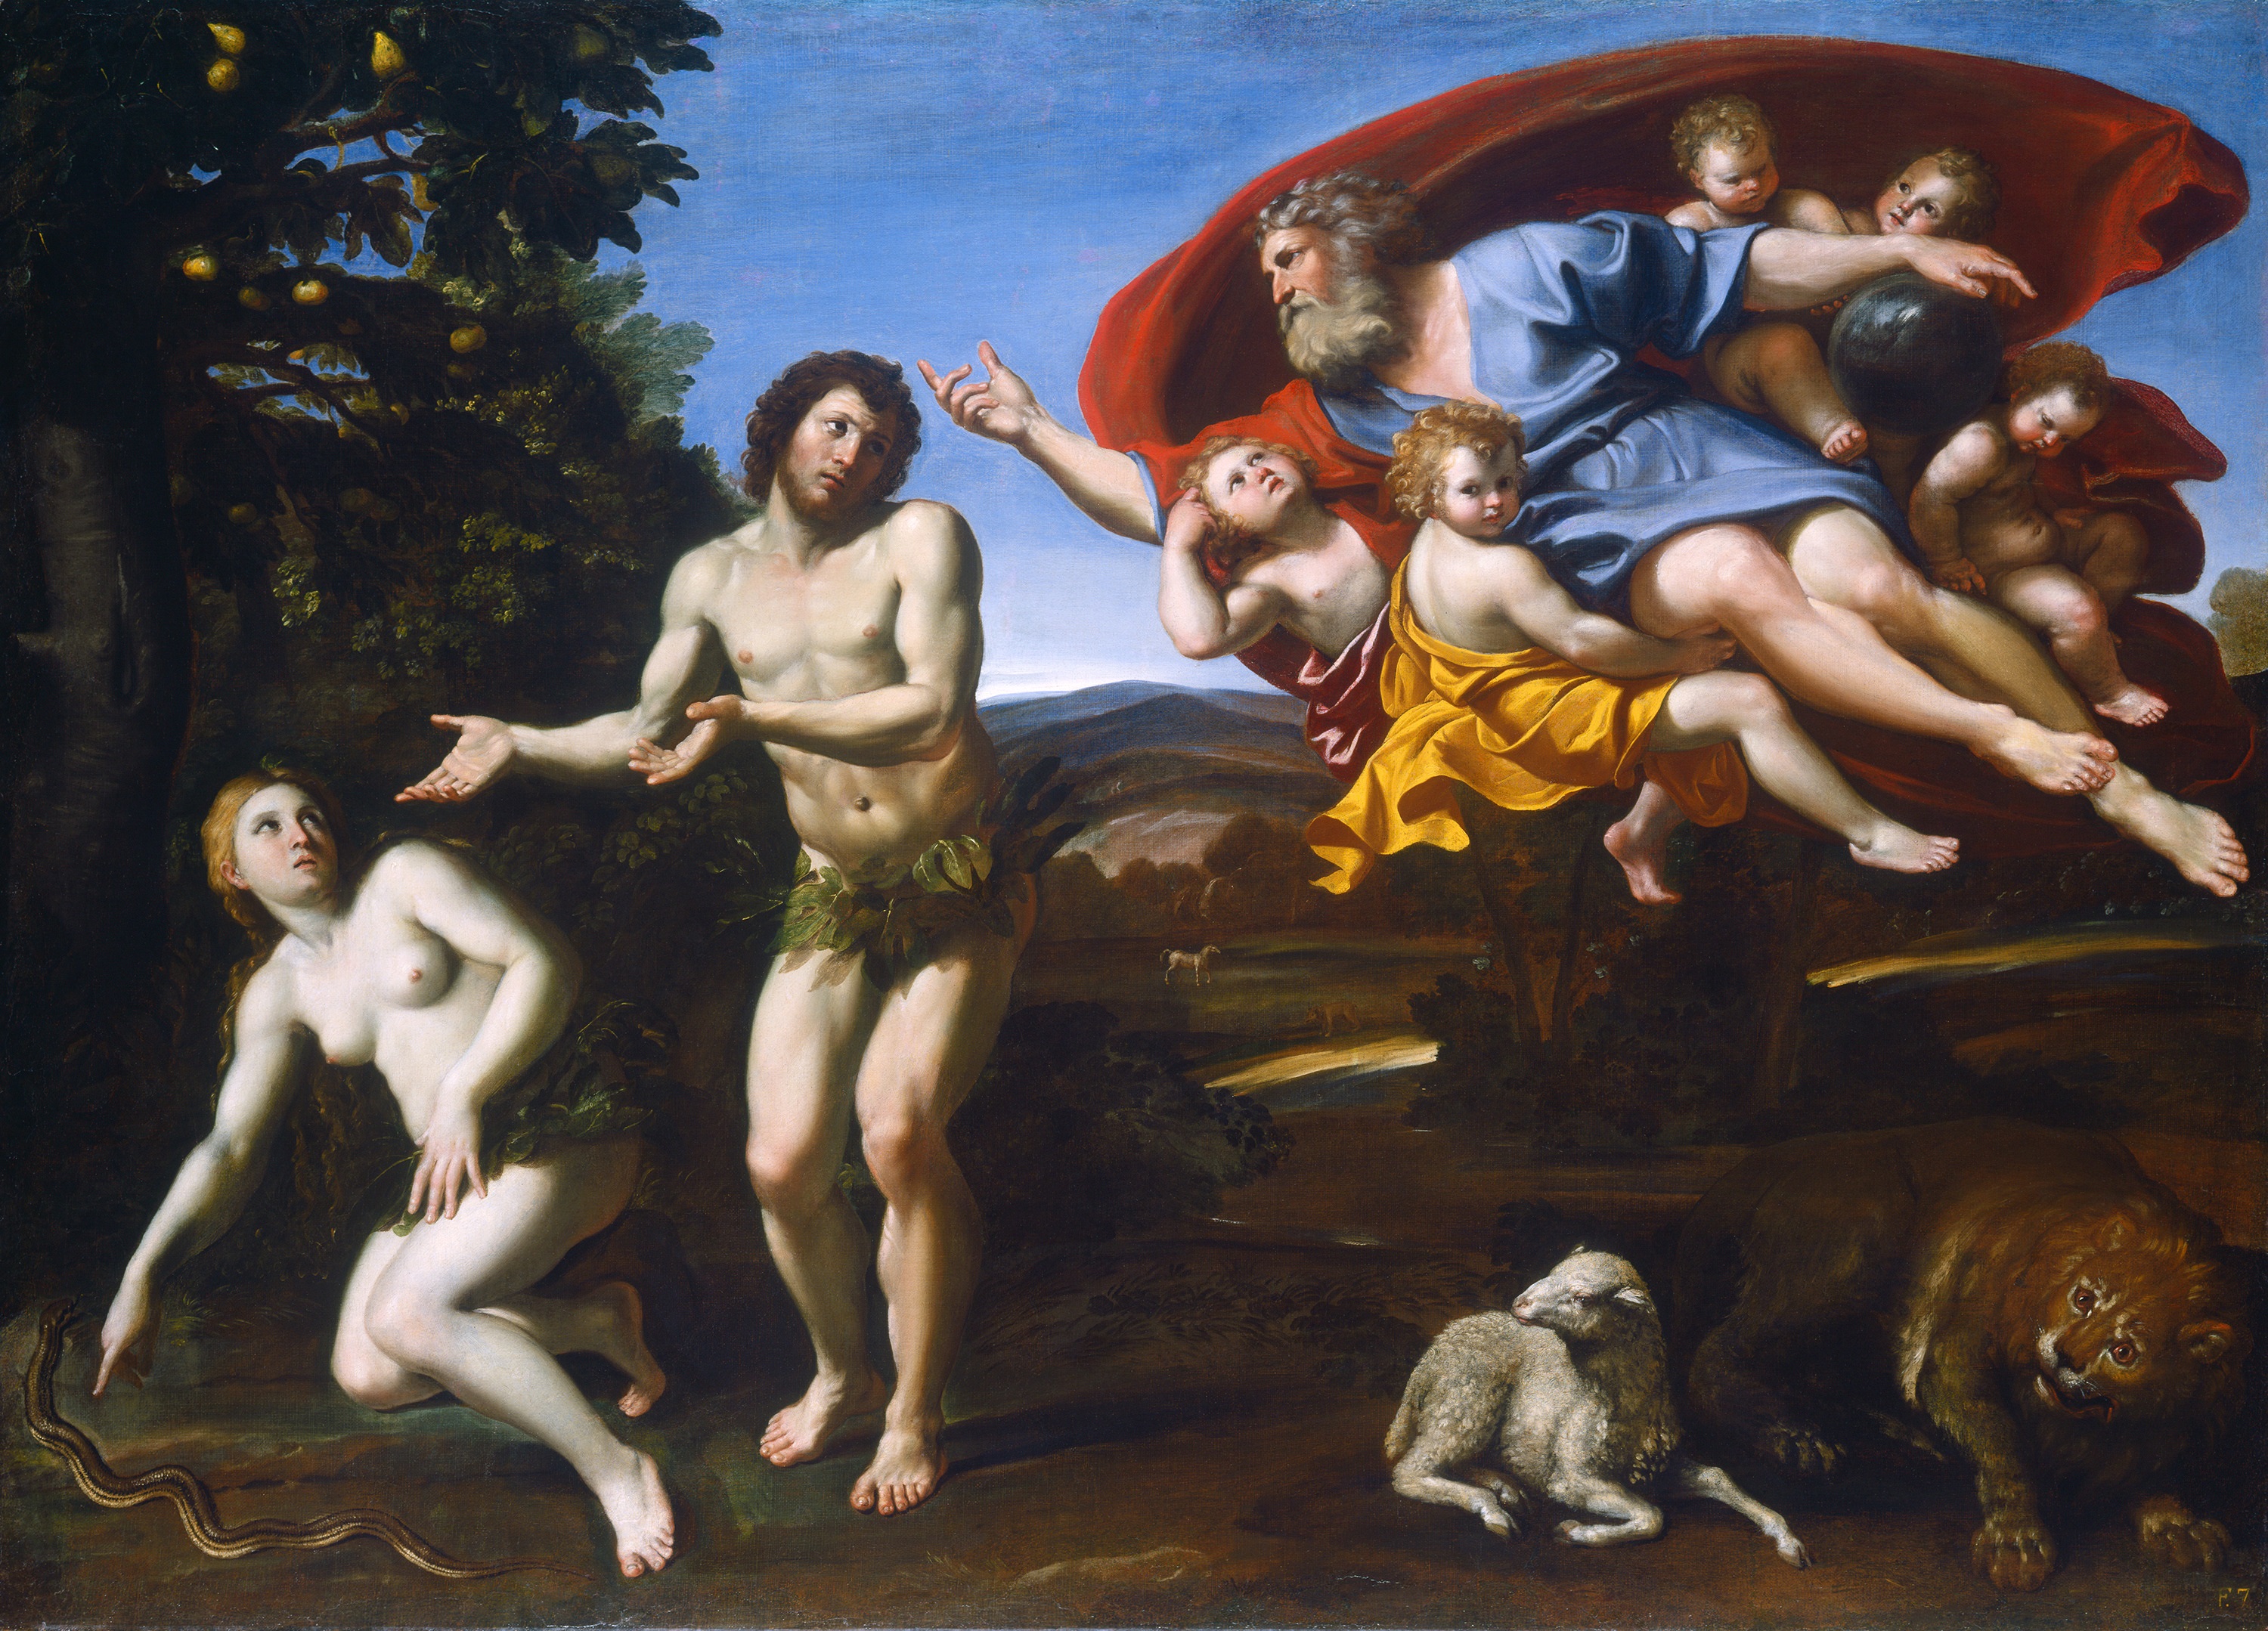 The Rebuke of Adam and Eve (1629) by Domenichino. Oil on canvas. National Gallery of Art, Patron’s Permanent Fund.